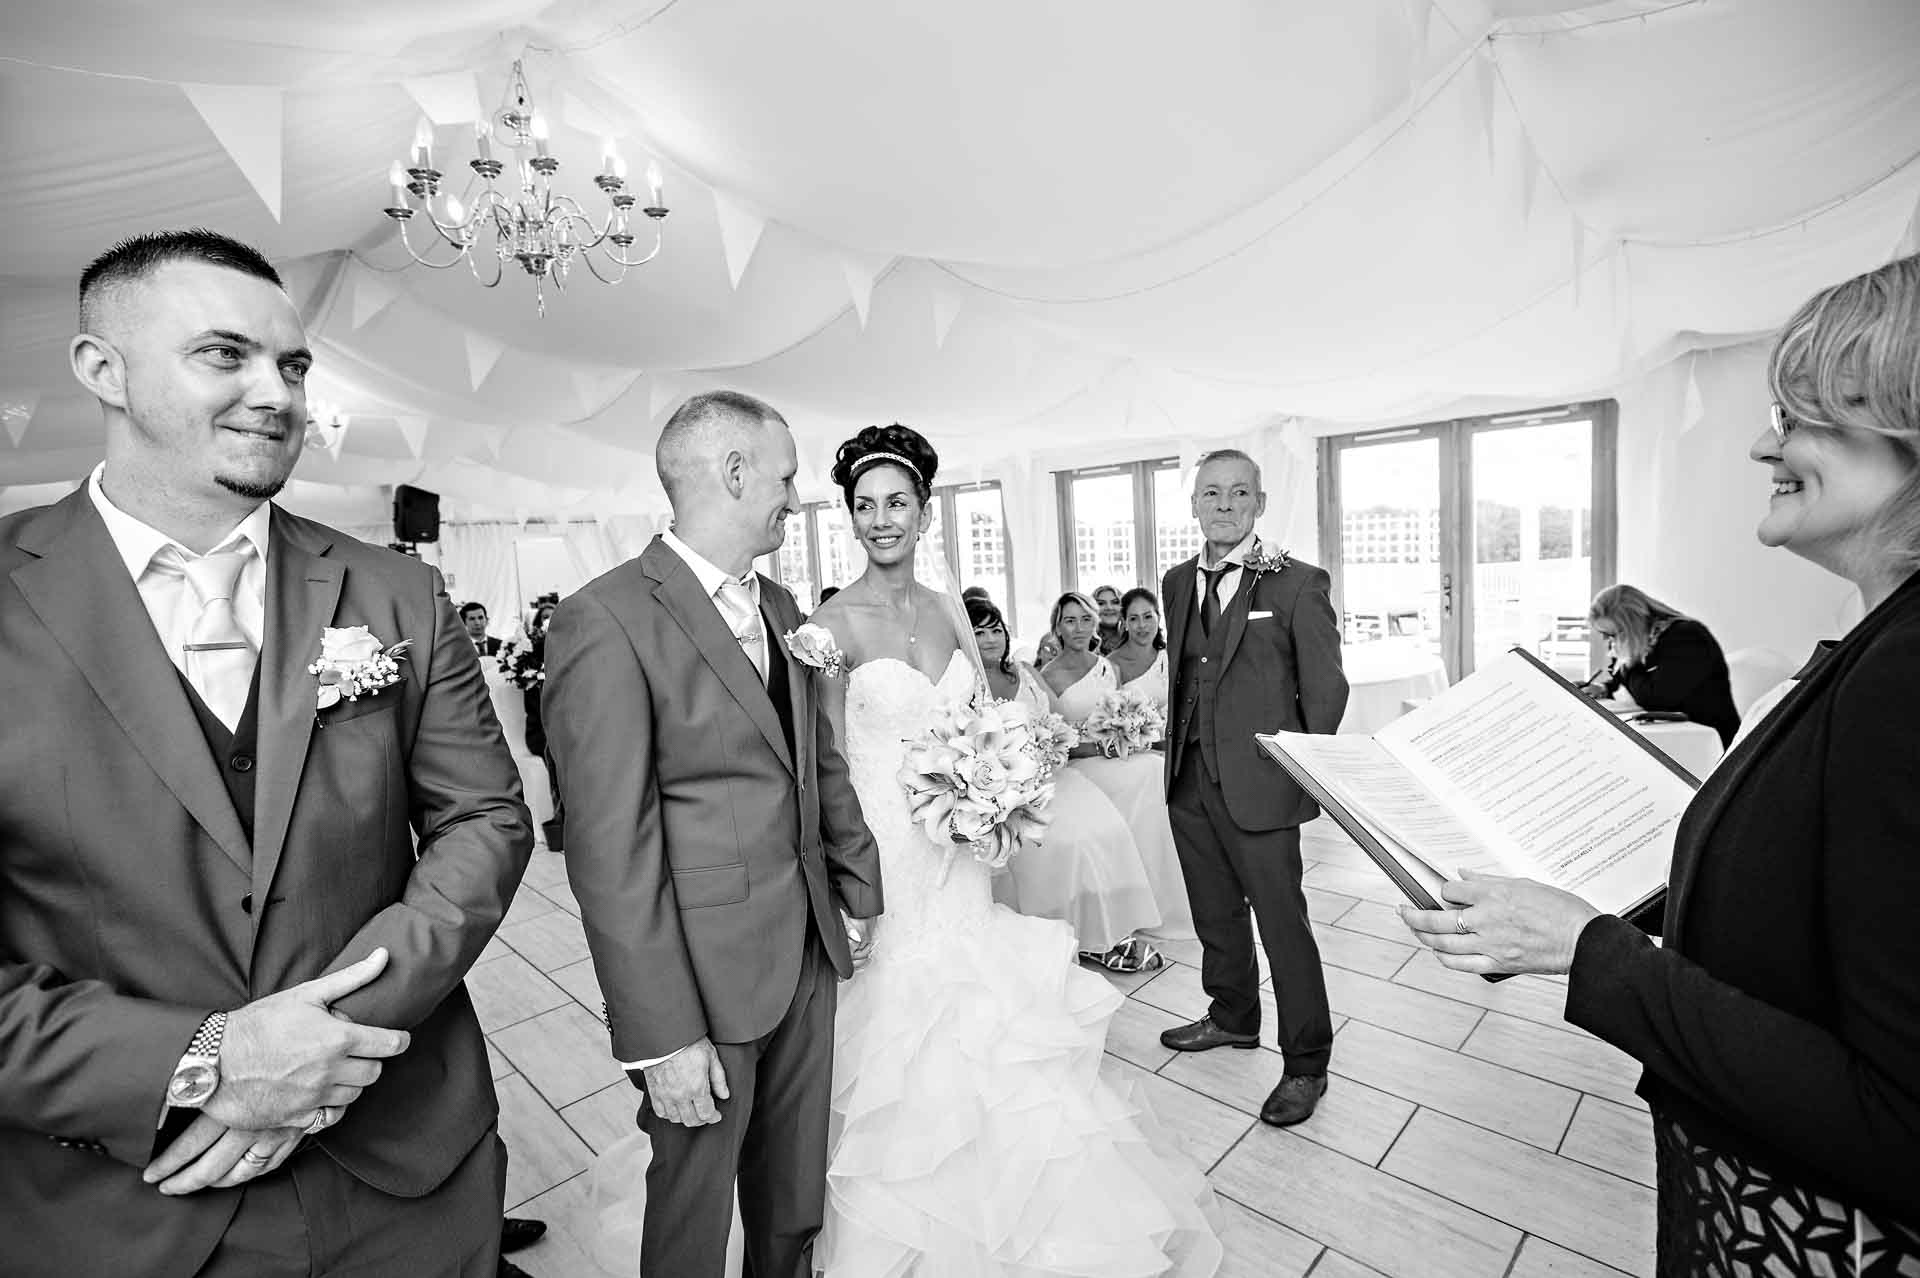 The bride and groom look at each other in the Marquee at the Ridgeway Golf Clud, Caerphilly during their wedding ceremony